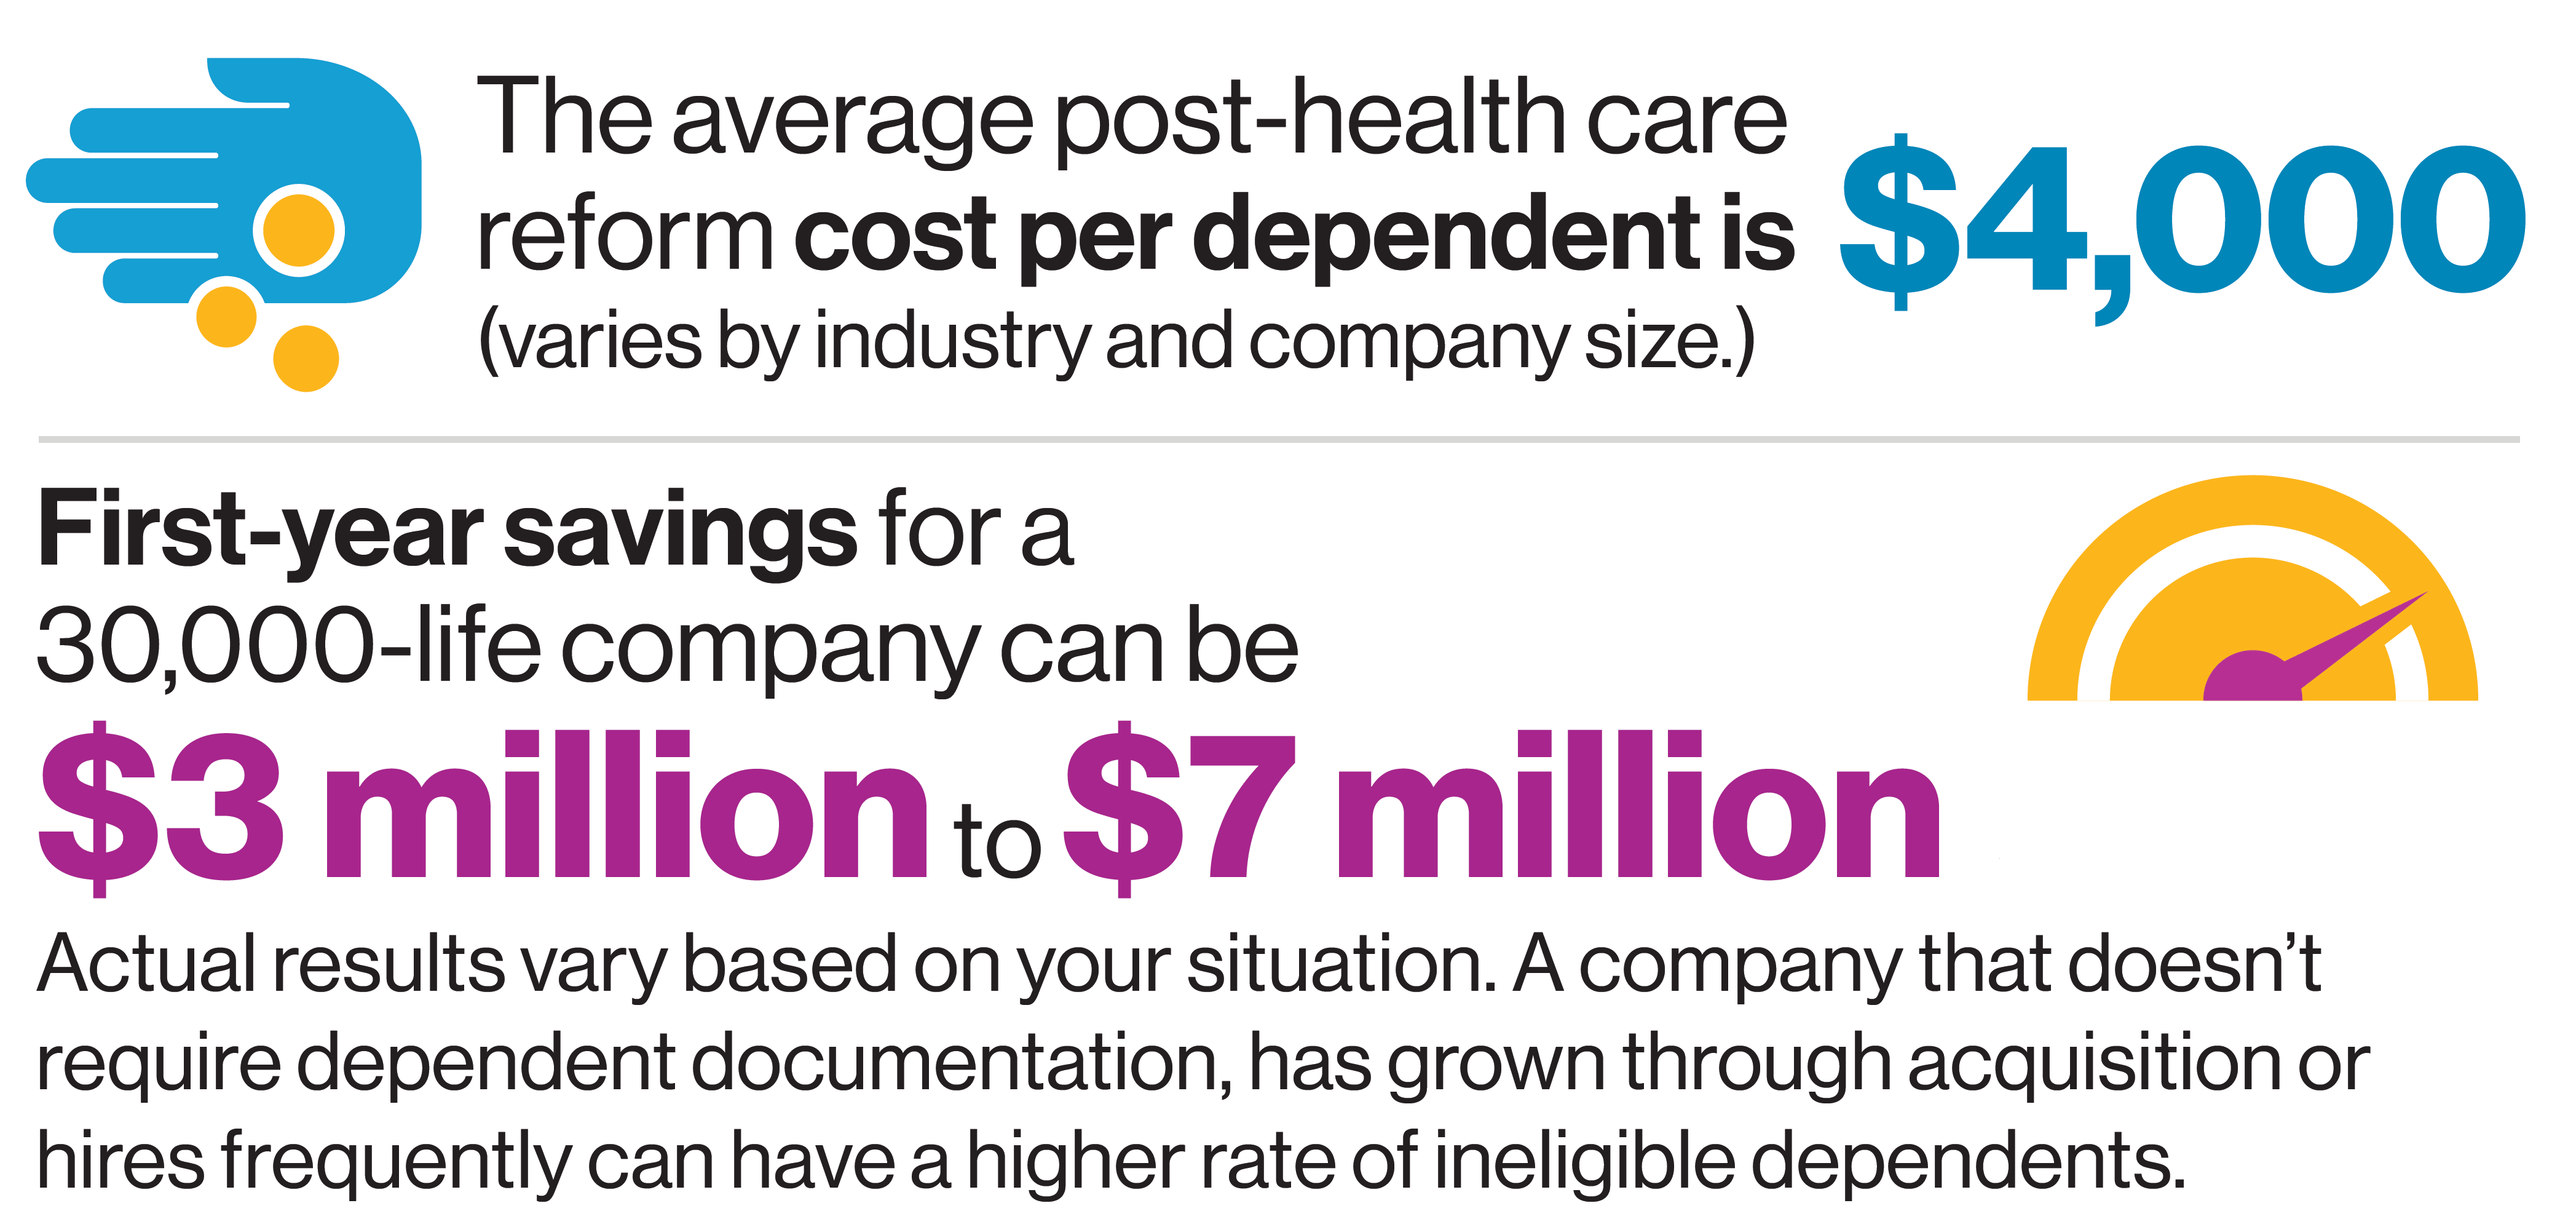 The average post-health care reform cost per dependent is $4,000 (varies by industry and company size.) First-year savings for a 30,000-life company can be $3 million to $7 million